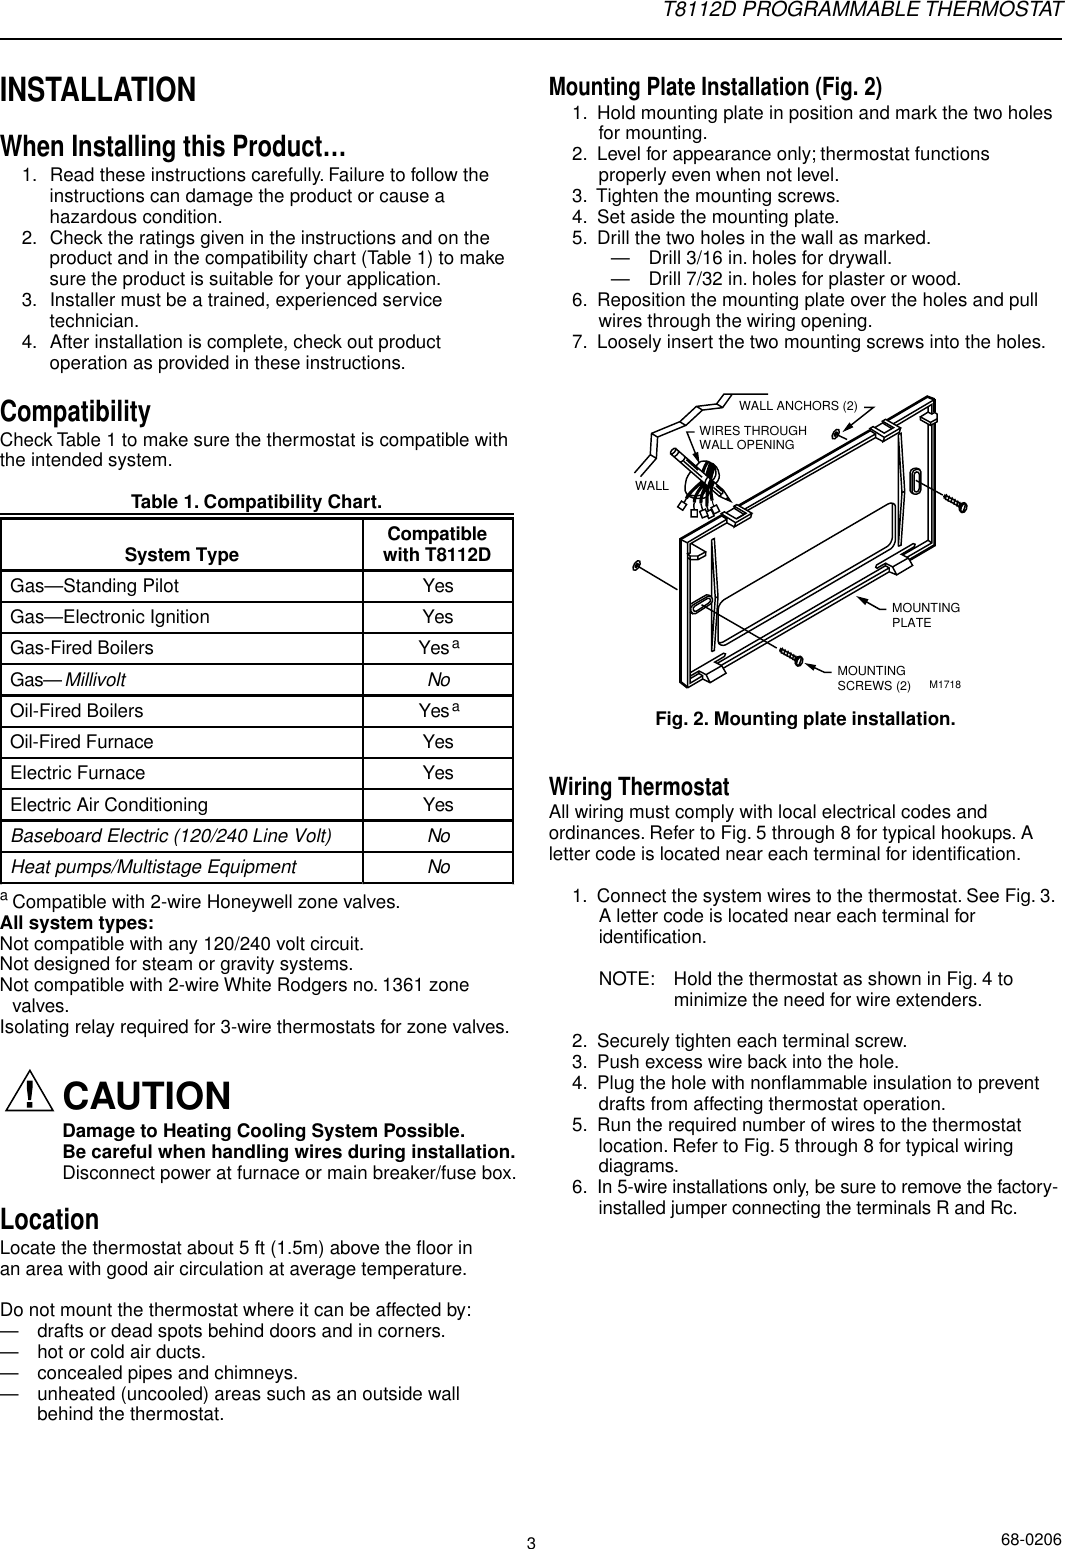 Page 3 of 8 - Honeywell Honeywell-T8112D-Owners-Manual- 68-0170 - T8112 Programmable Thermostat  Honeywell-t8112d-owners-manual